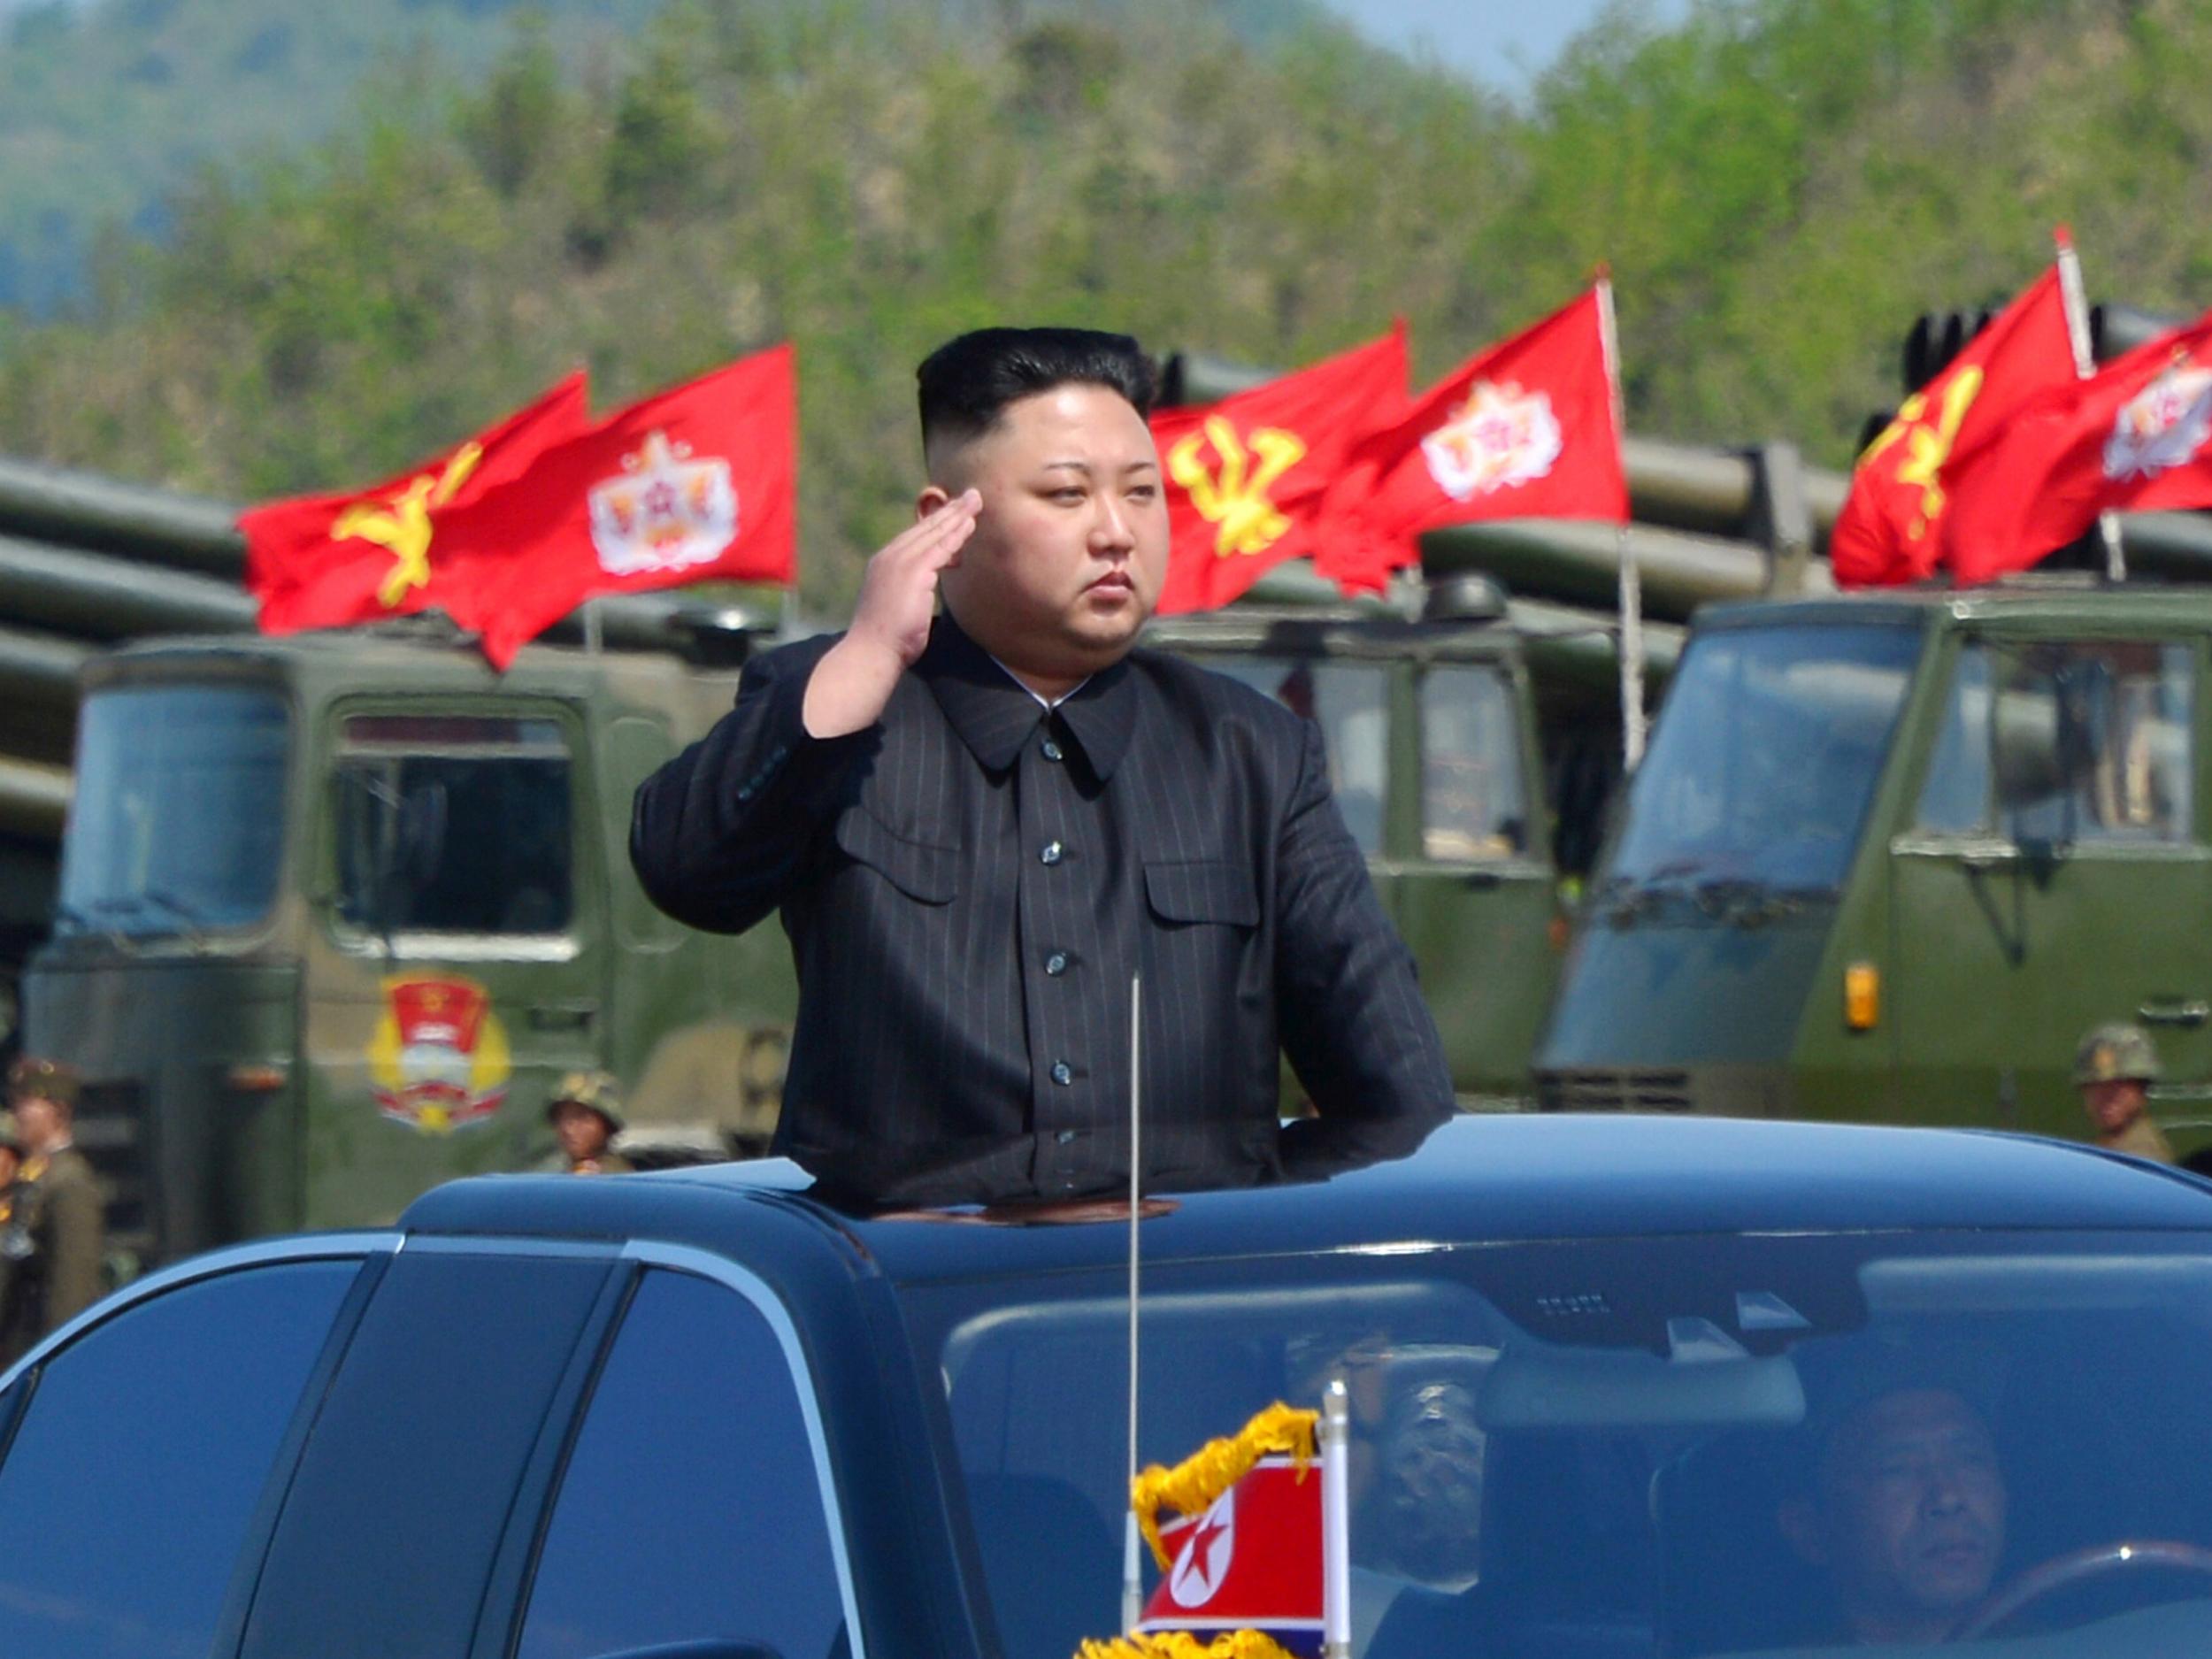 The North Korean leader has cut an isolated figure since taking over from his father in 2012